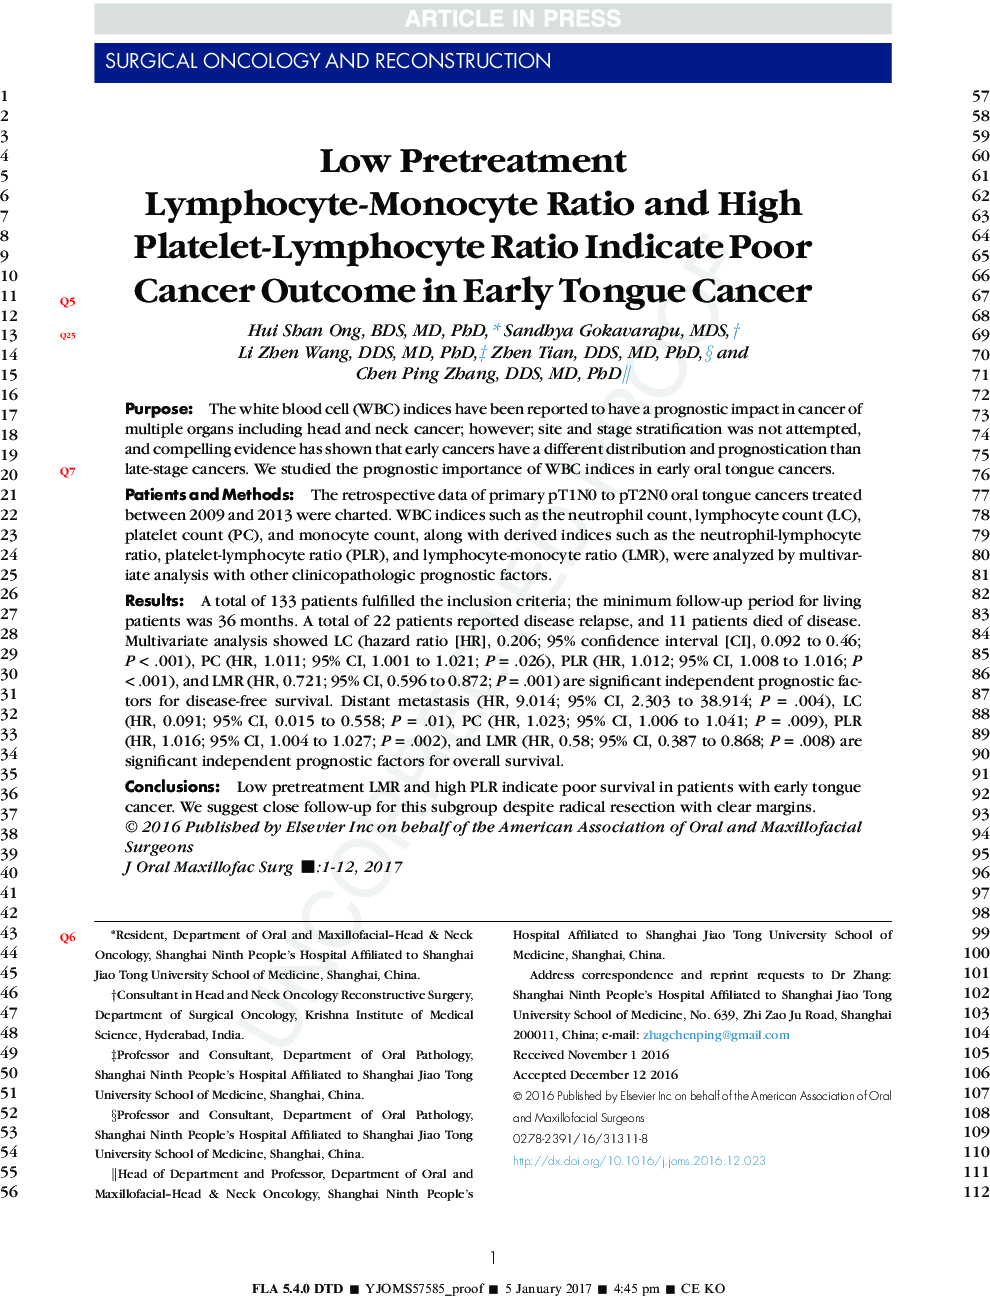 Low Pretreatment Lymphocyte-Monocyte Ratio and High Platelet-Lymphocyte Ratio Indicate Poor Cancer Outcome in Early Tongue Cancer